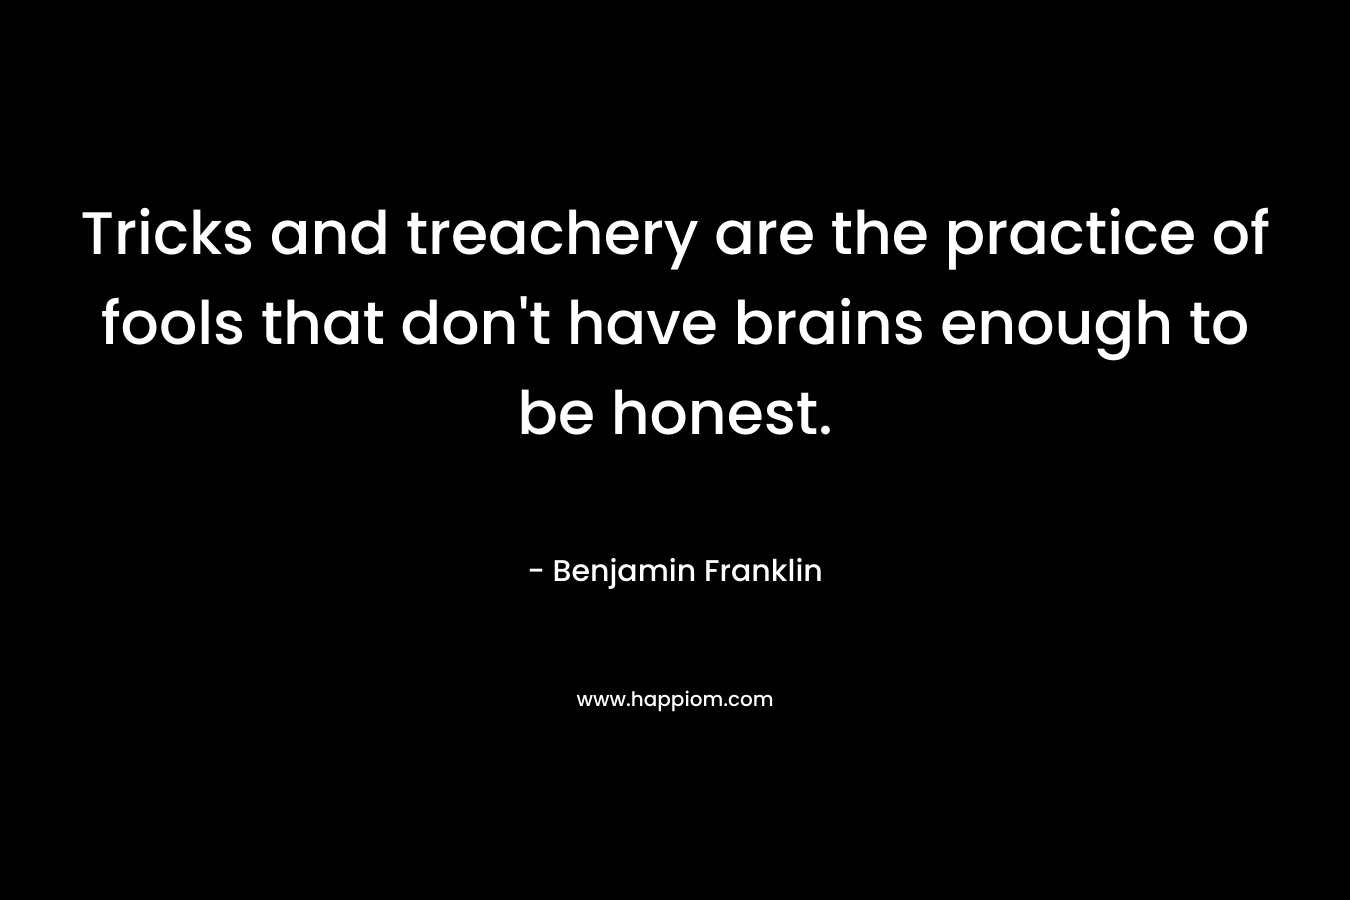 Tricks and treachery are the practice of fools that don’t have brains enough to be honest. – Benjamin Franklin